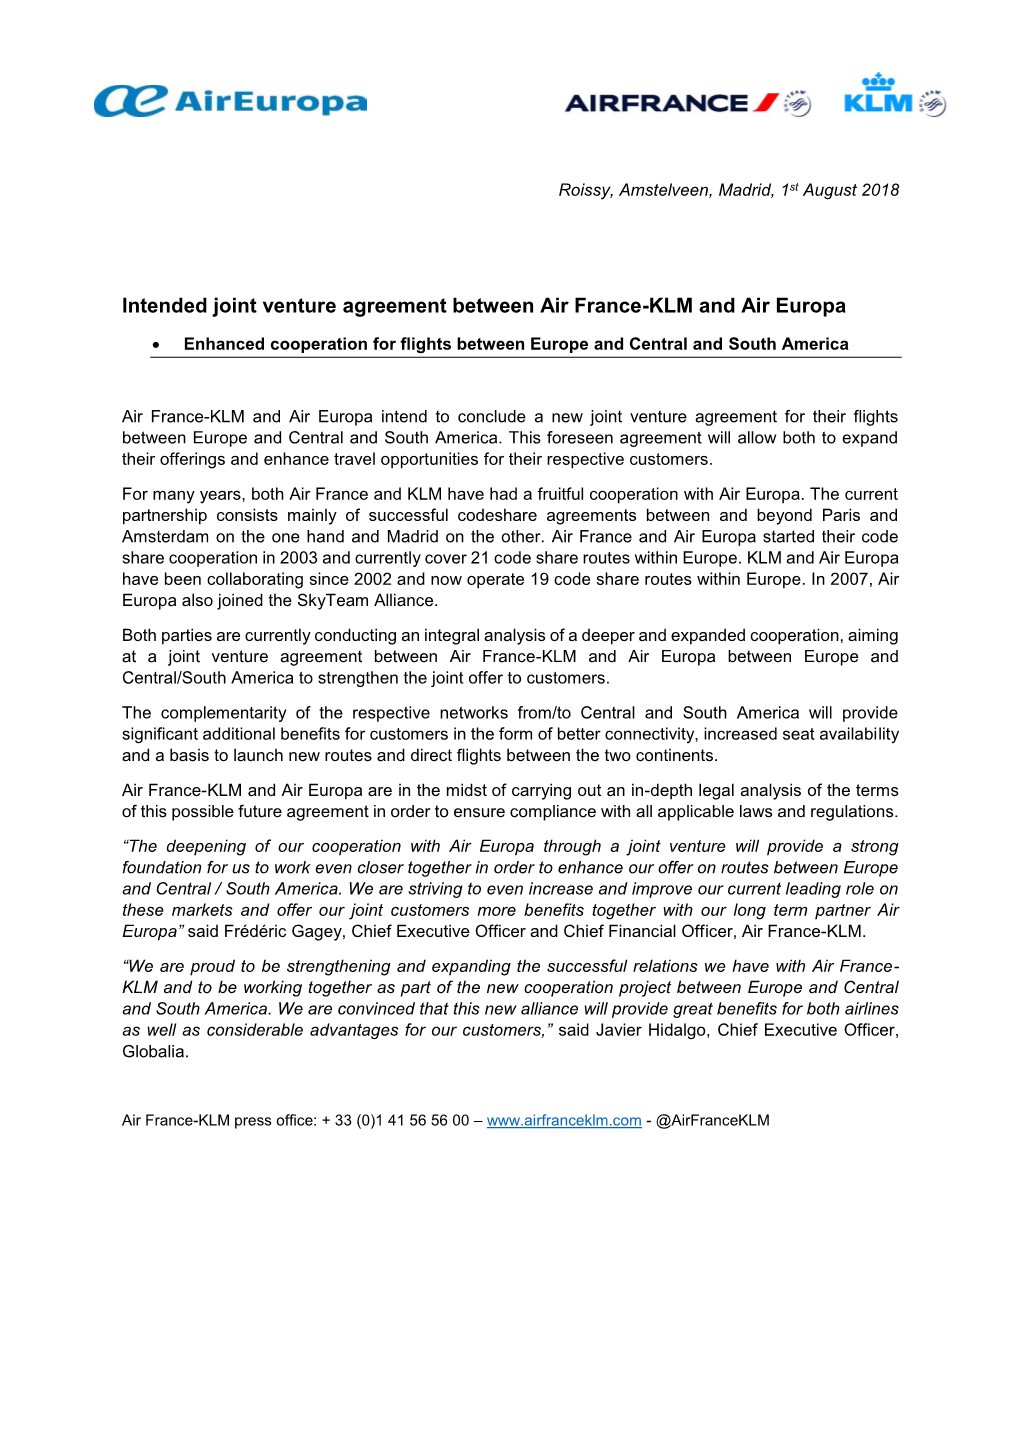 Intended Joint Venture Agreement Between Air France-KLM and Air Europa